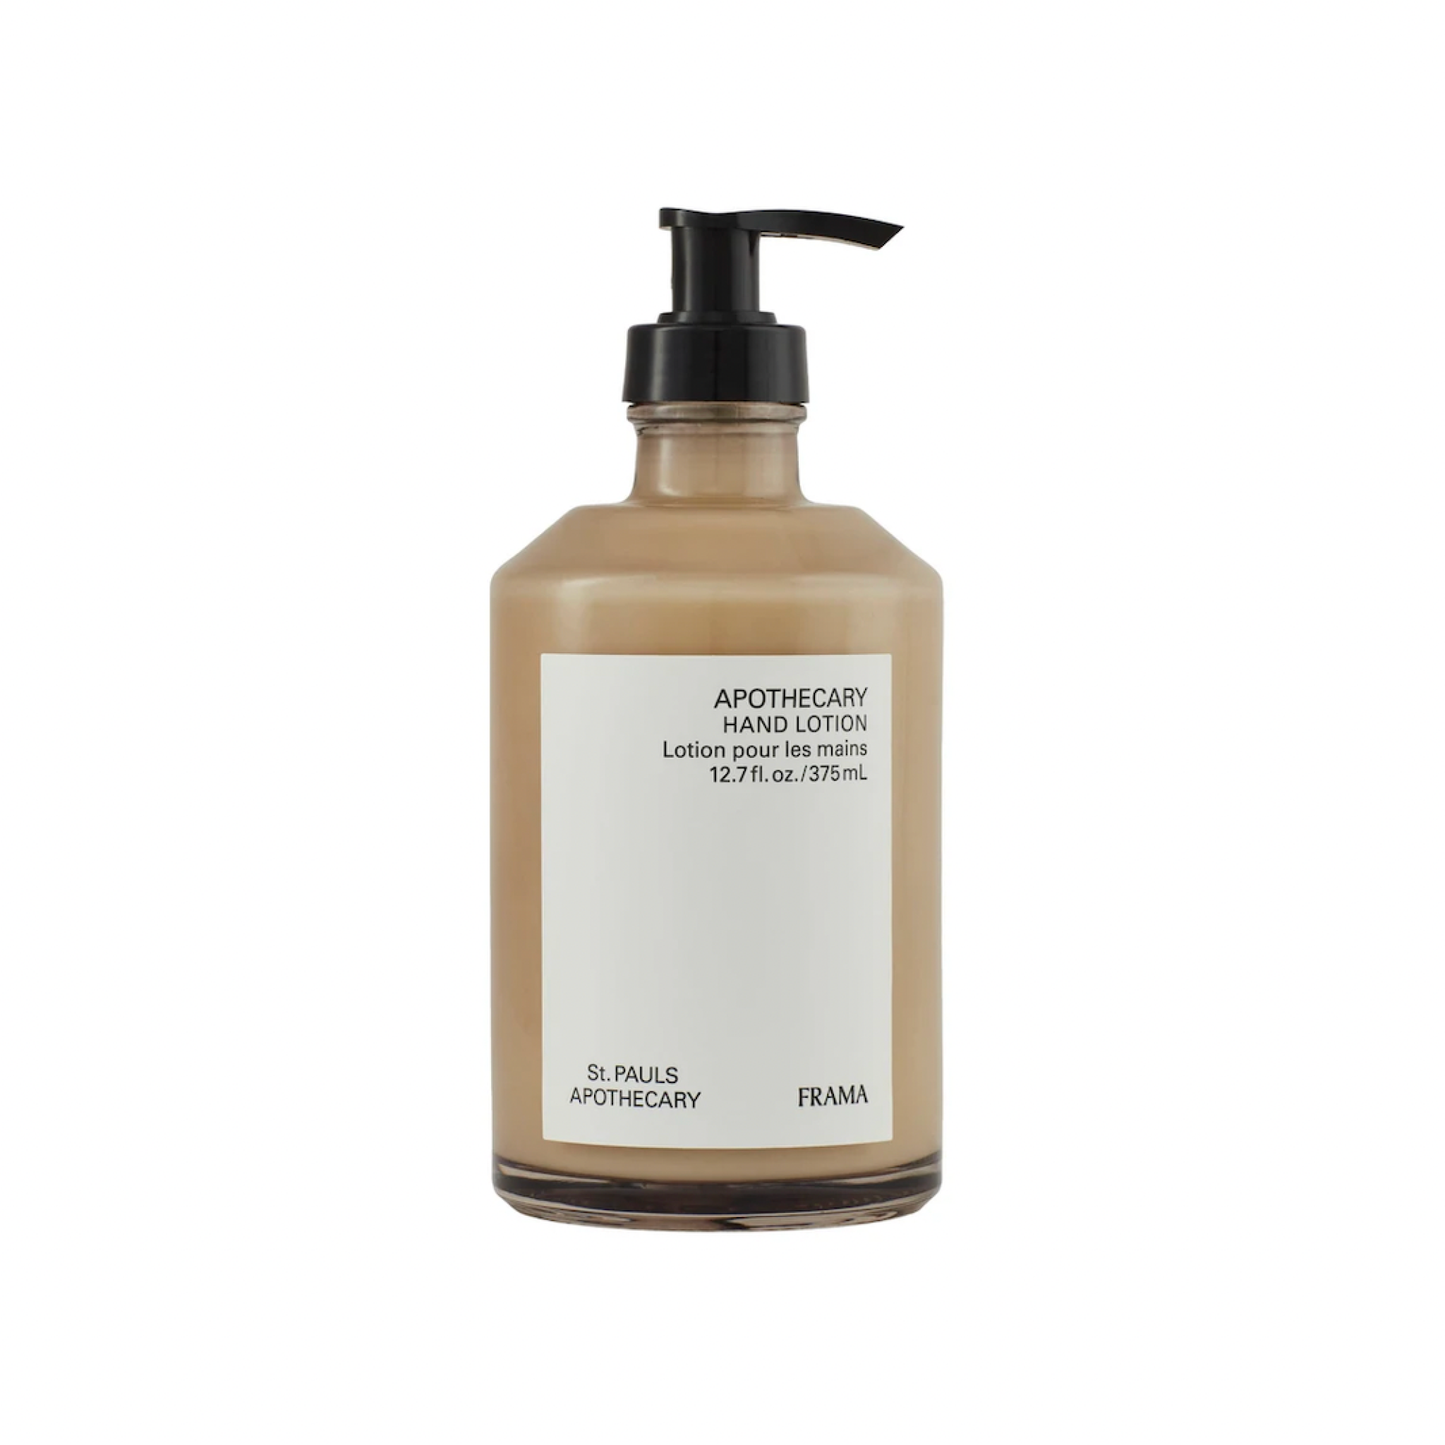 Apothecary Hand lotion, 375 ml